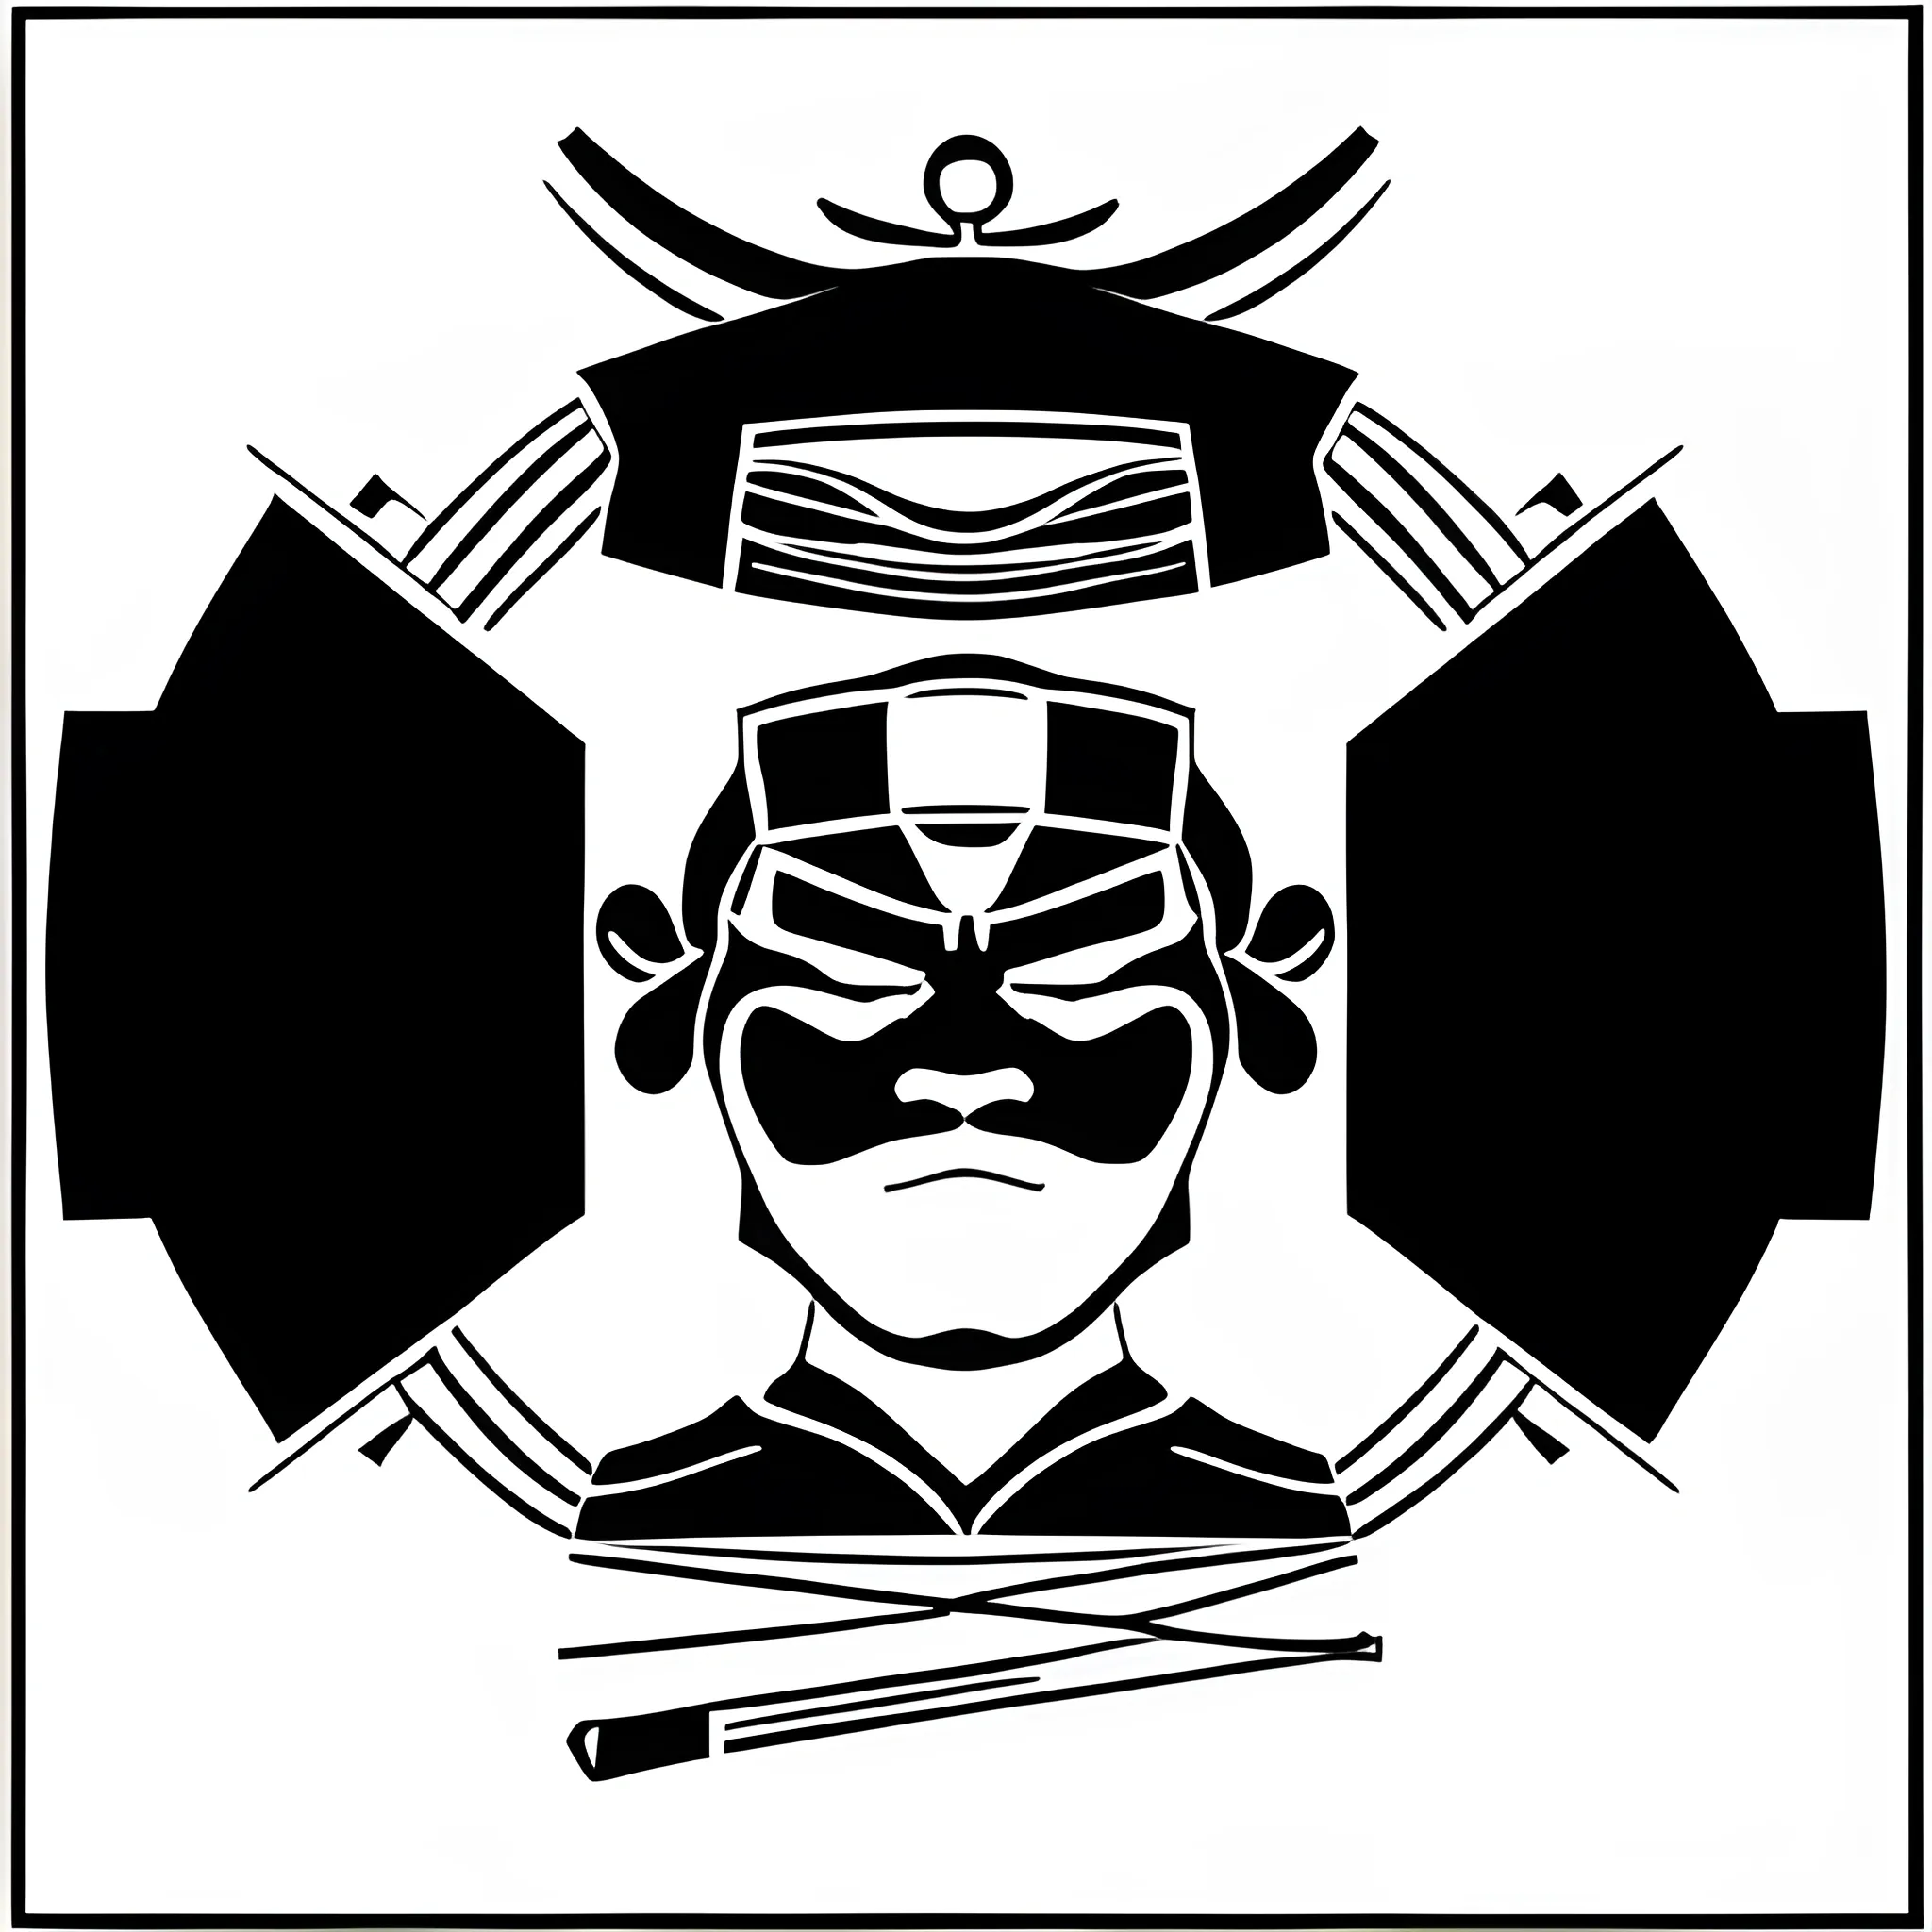 generate an art form that is similar to samurai art using all types of shapes and only outlines but without color, 